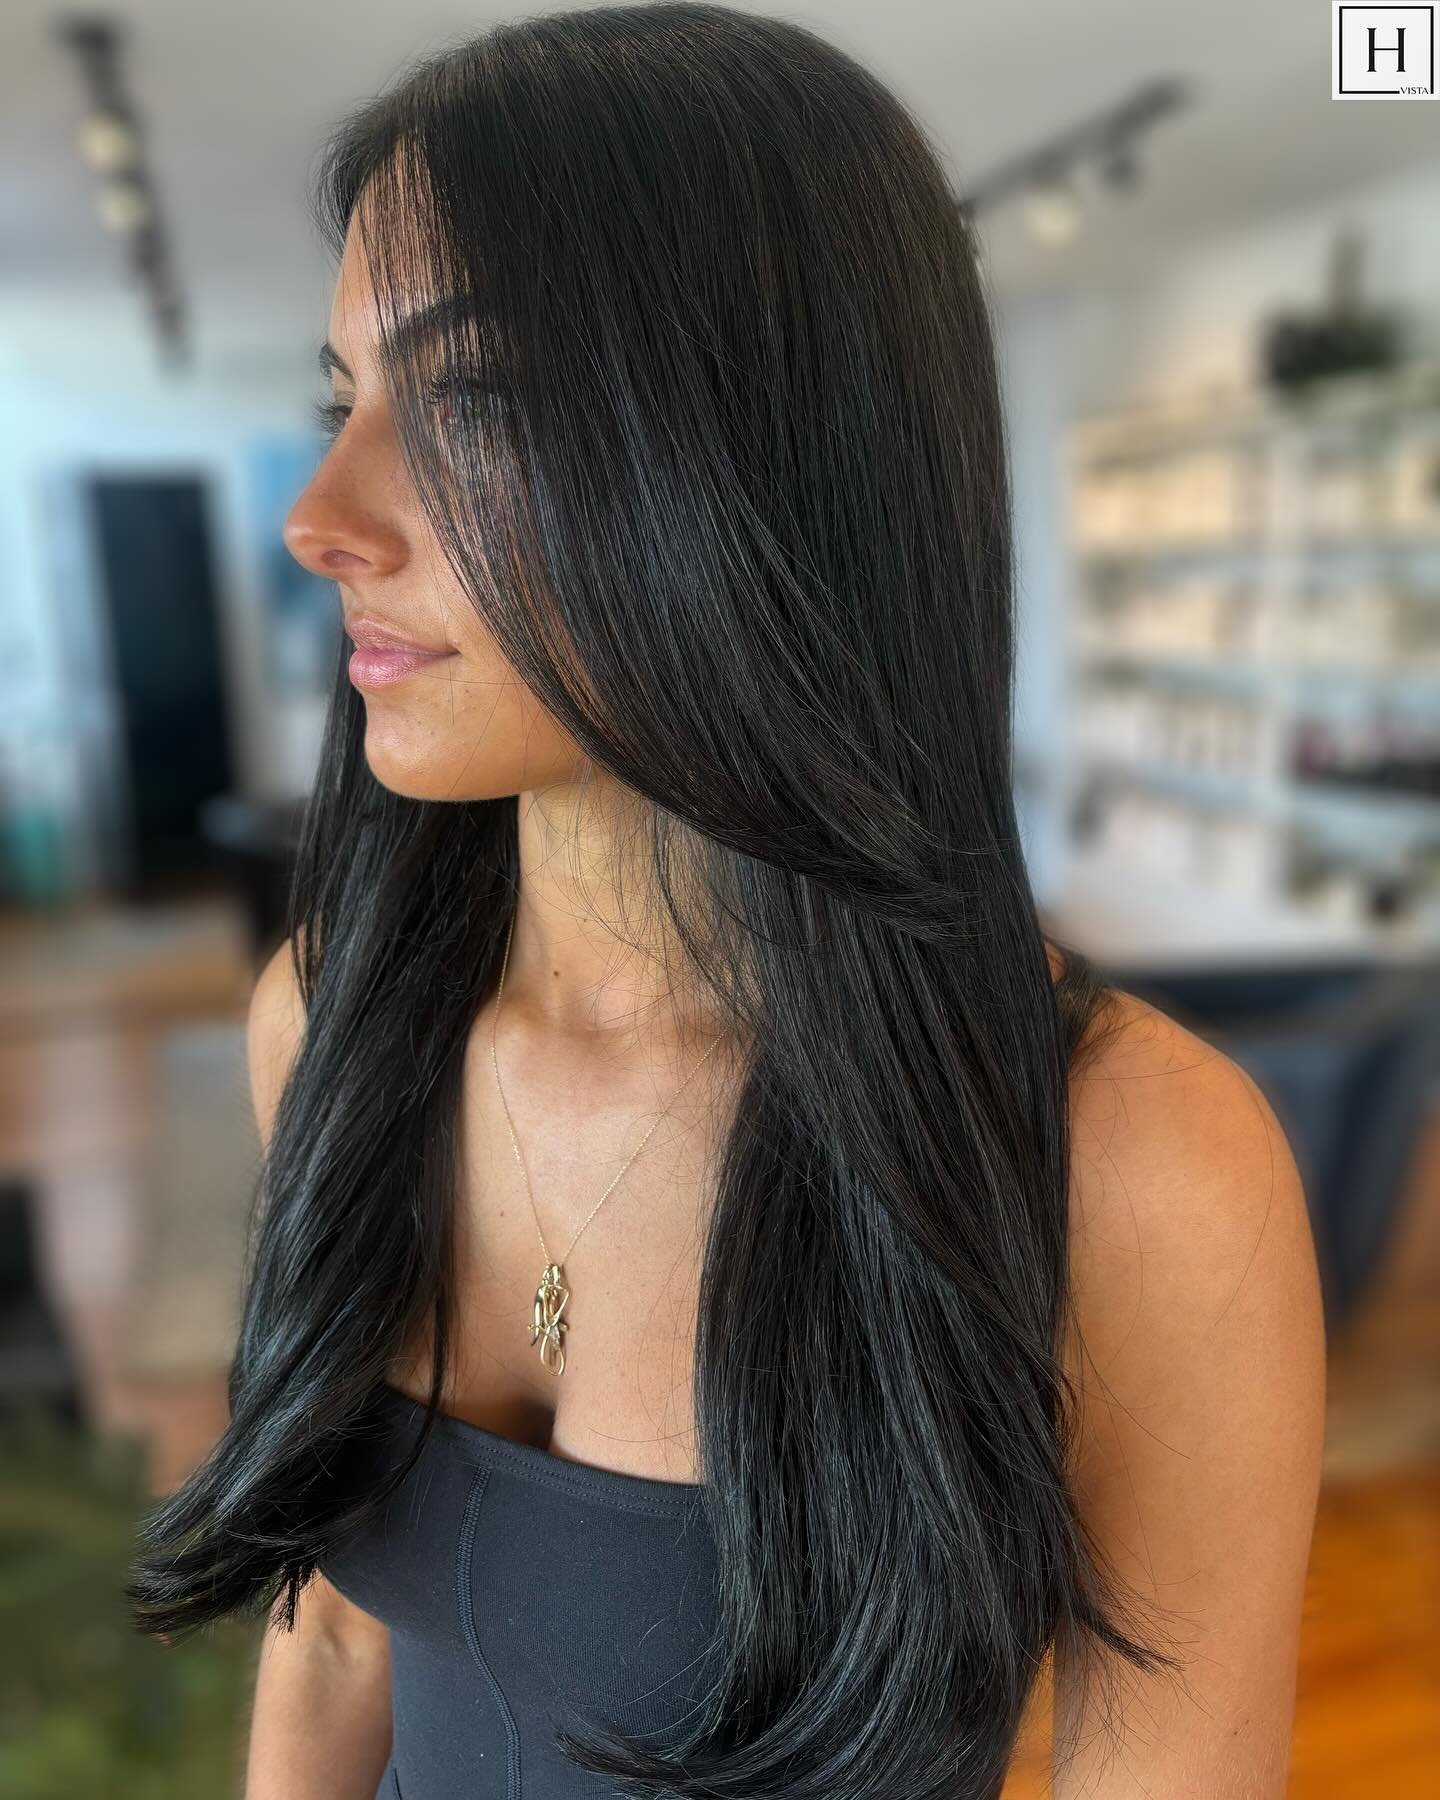 POV: you just walked out from your appointment, instantly feeling more confident and ready to take on the world! 🤩🖤

Stylist: @maceydidmyhair 

#hair #hairsalon #hairstylist #hydesalon #hydevista #thevista #downtowncola #uofsc #columbiasc #gervaiss